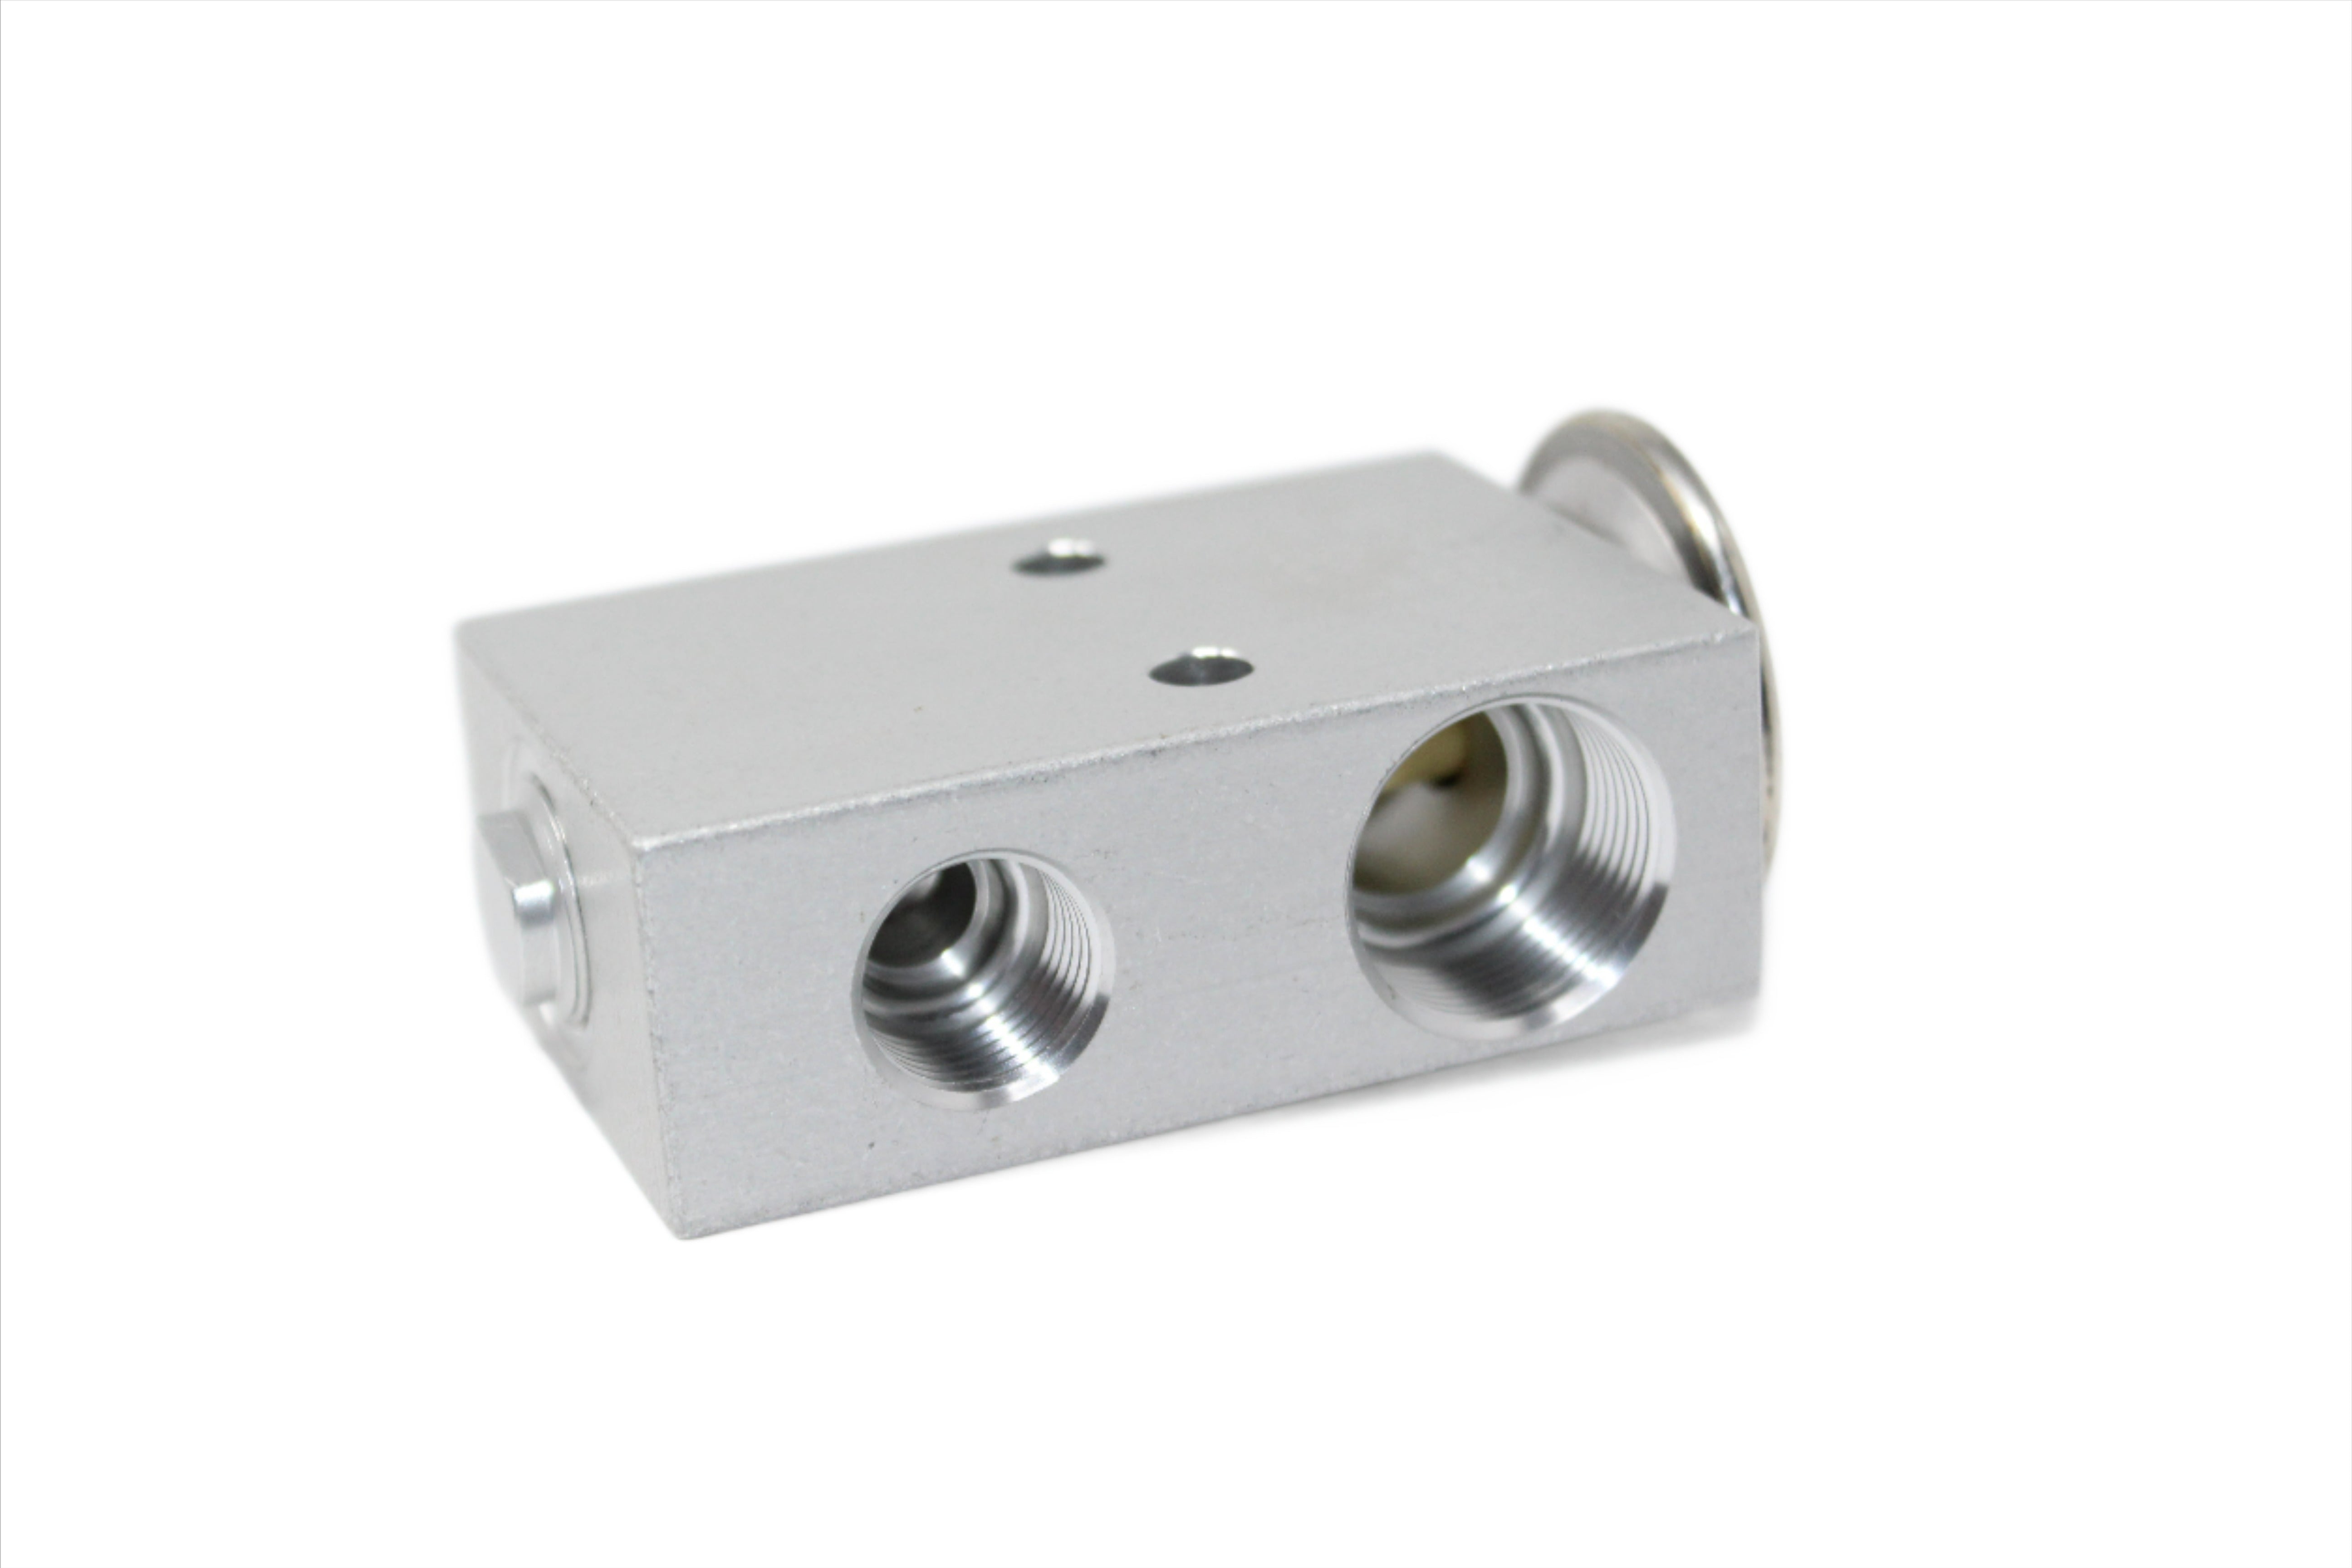 Expansion Valve Block For Red Dot Units 71R8301 Refrigerant Control